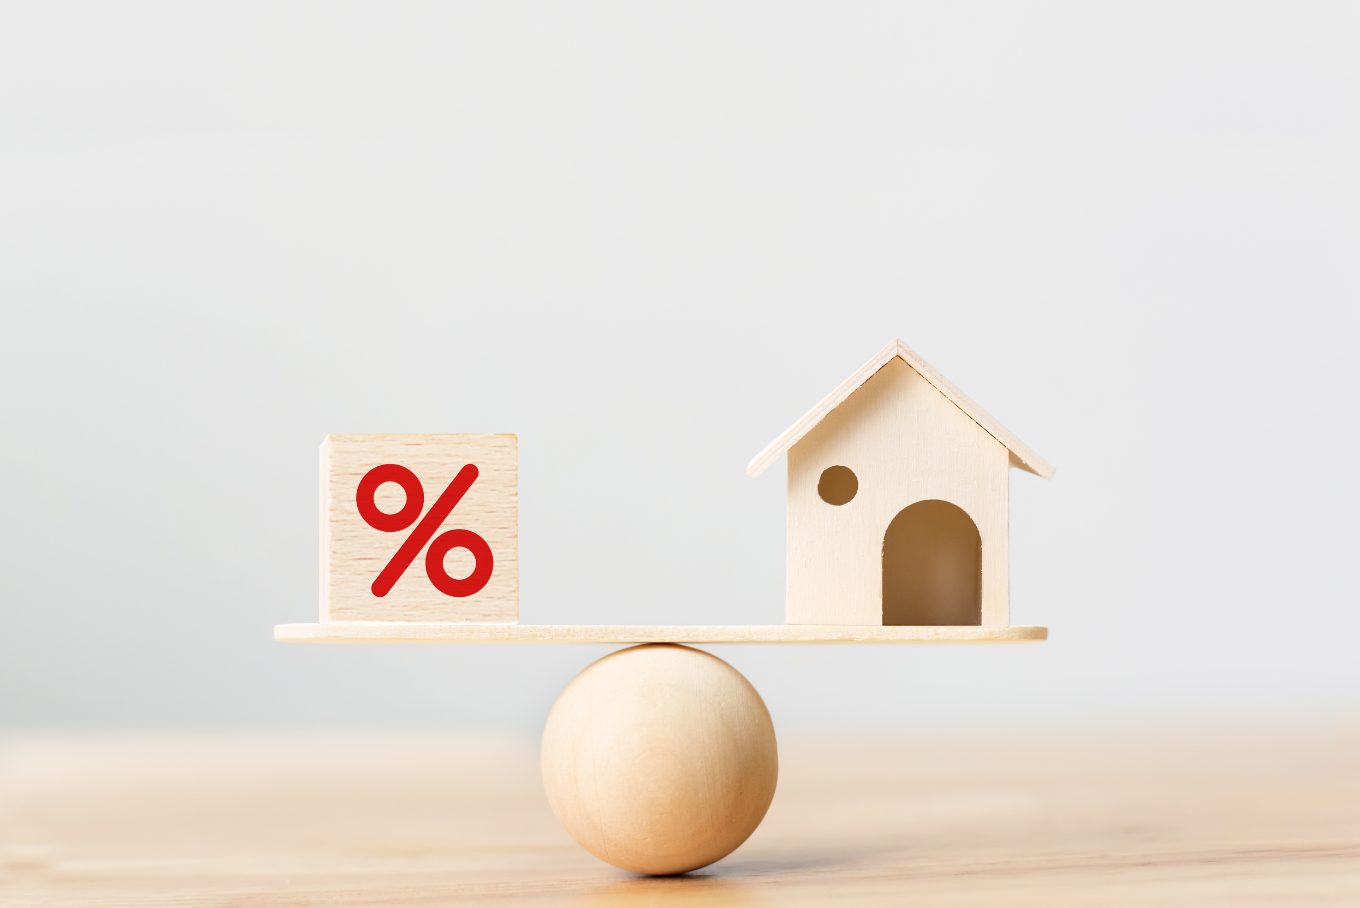 interest rates with house balancing on an egg